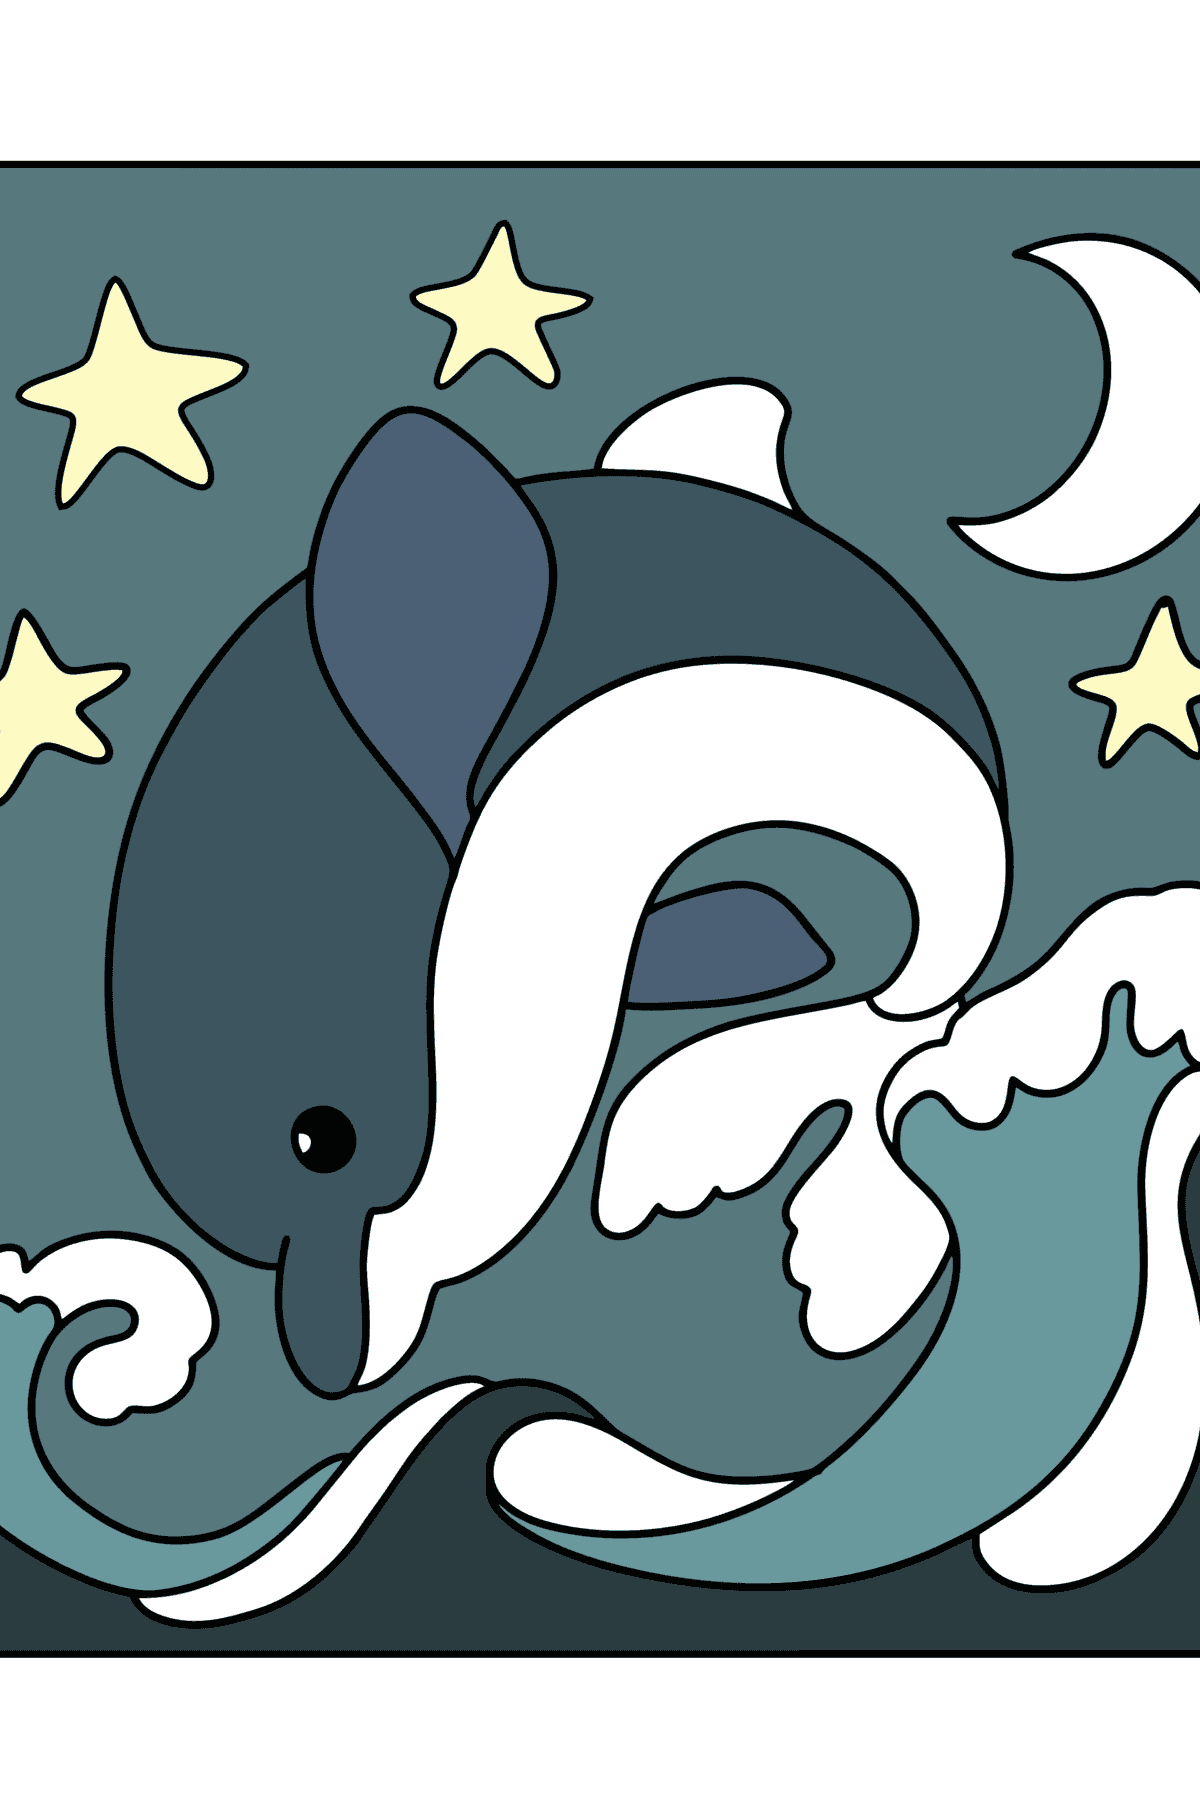 Dolphin in the Sea coloring page - Coloring Pages for Kids